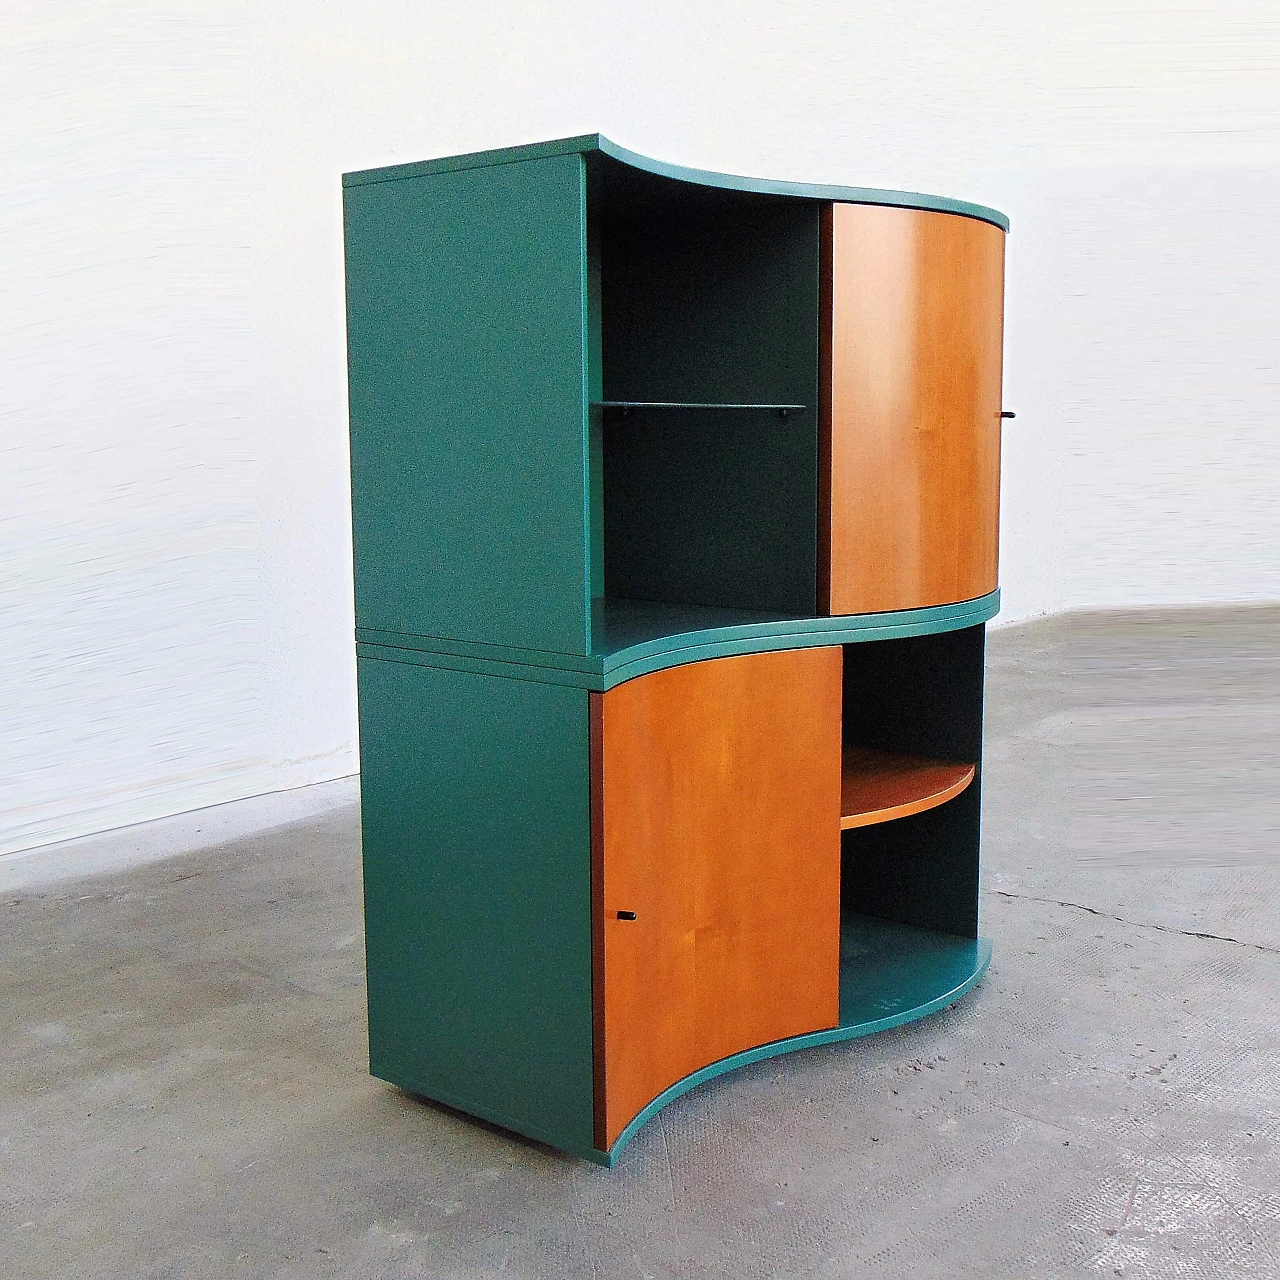 Sideboard Green Satin Lacquer, Doors in Walnut-Stained Cherry, for Roche Bobois, 1990s 1167291